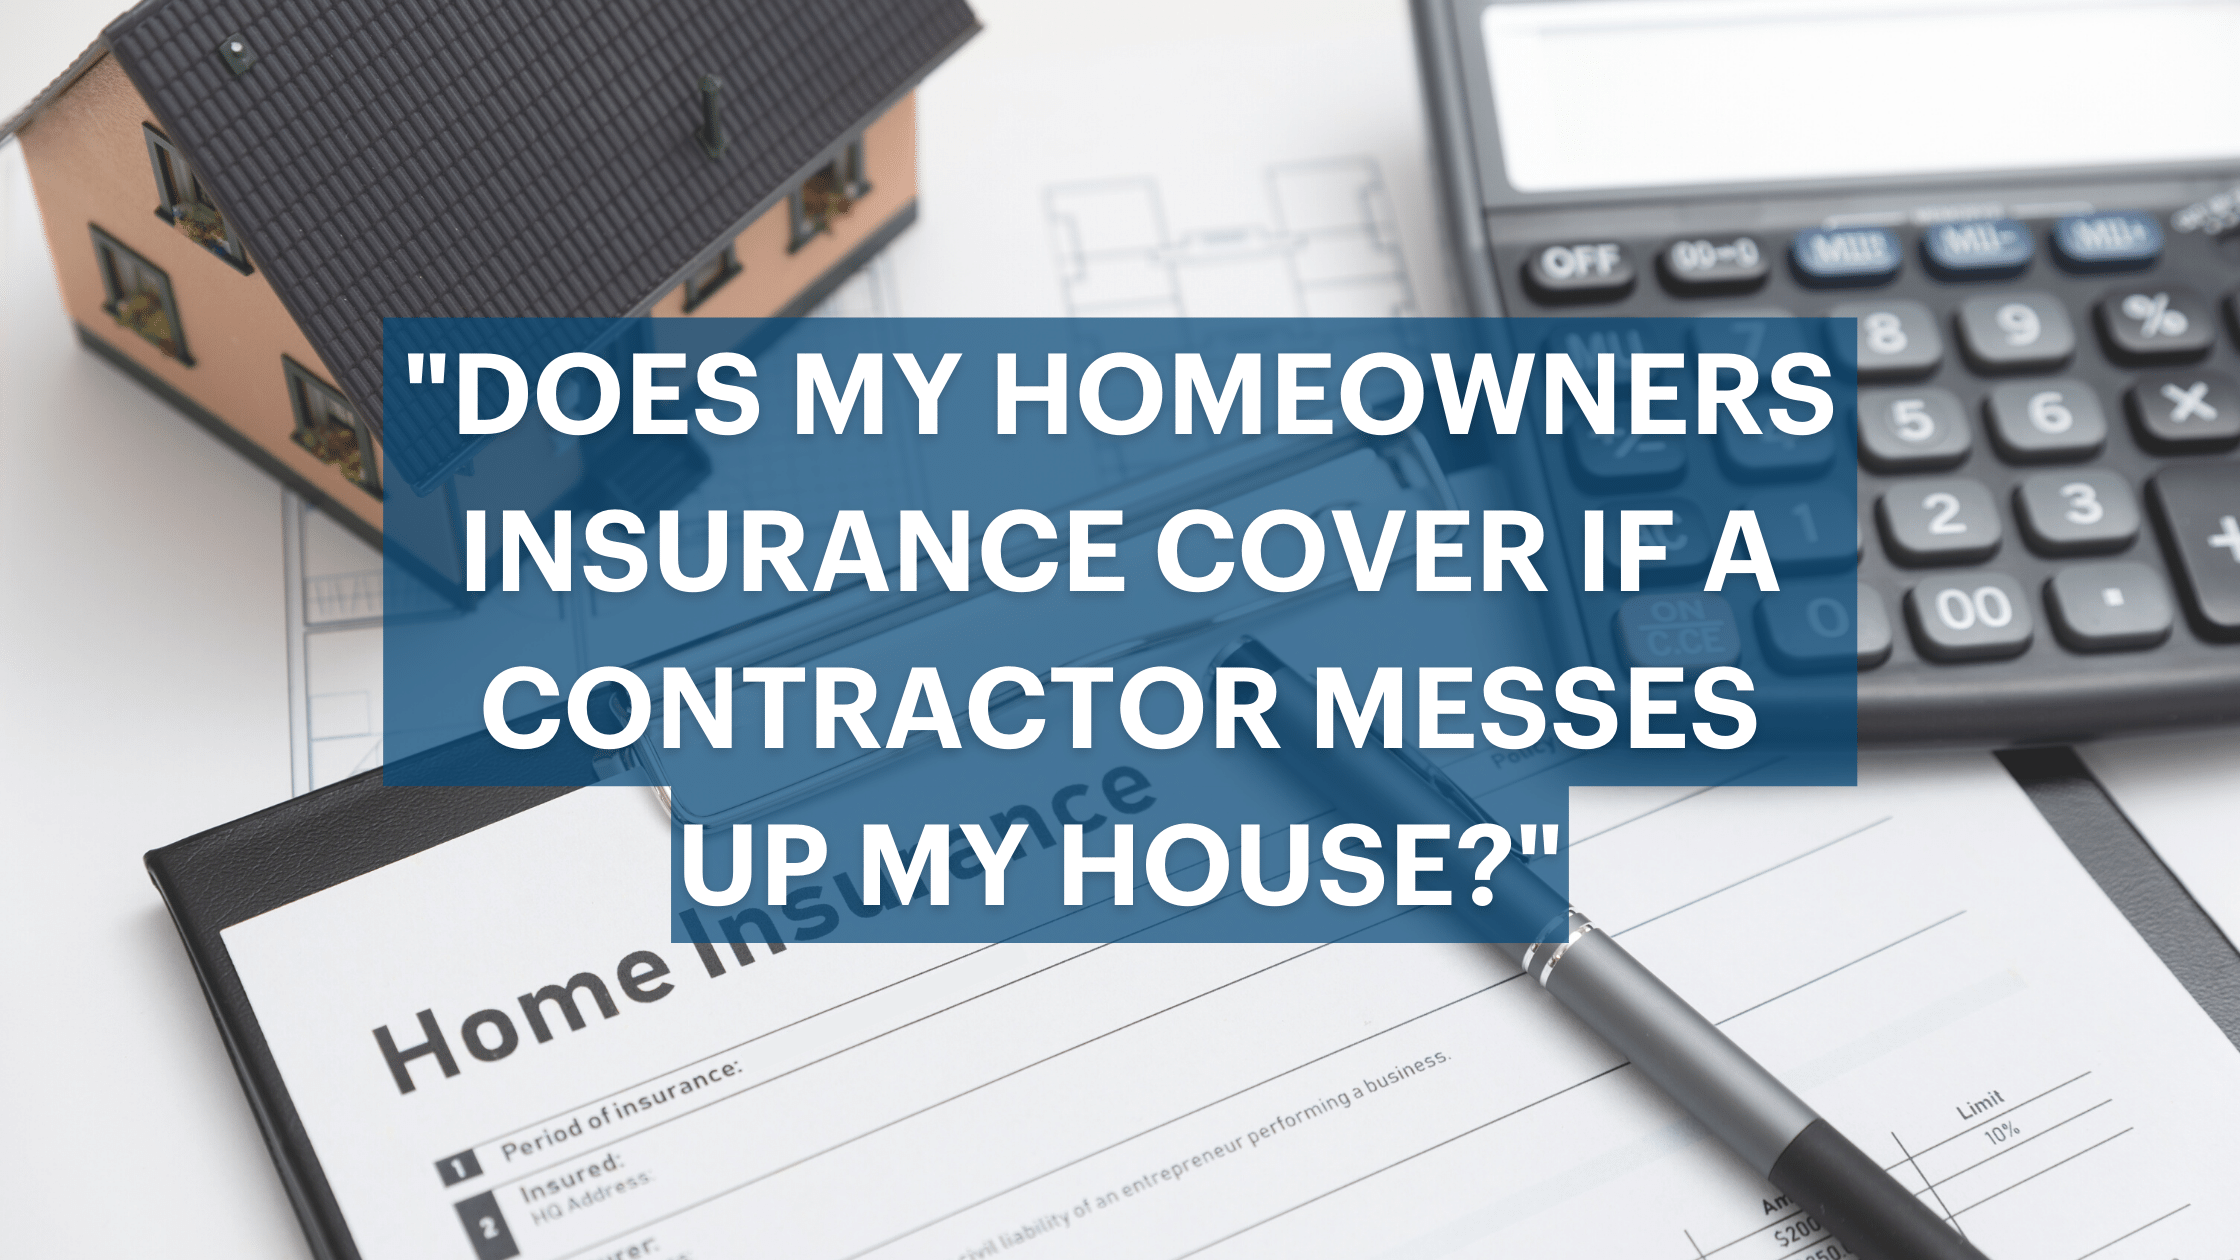 Does My Homeowner’s Insurance Cover if a Contractor Messes Up My House?